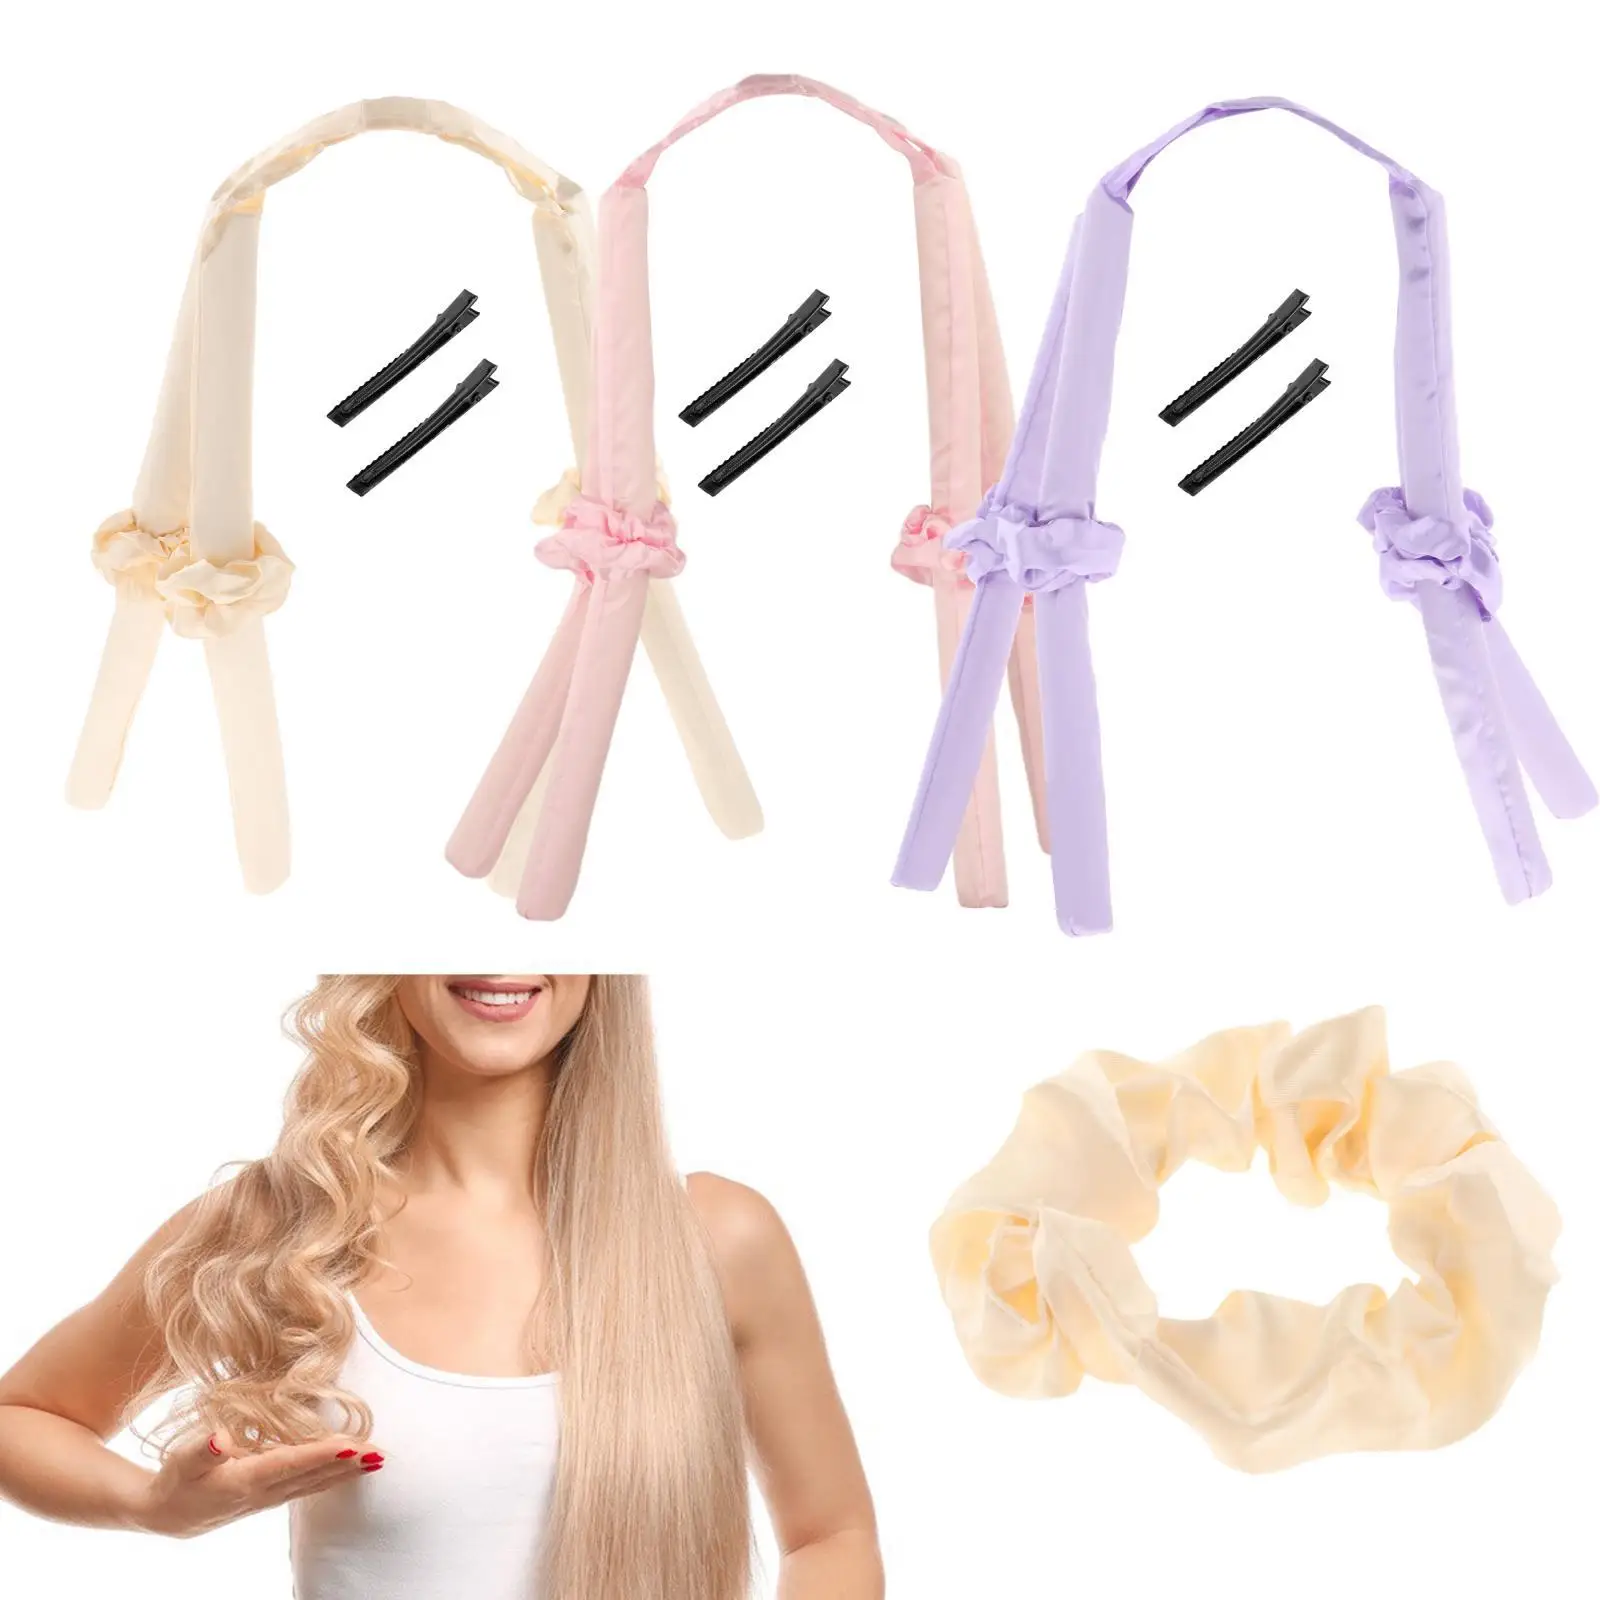 Women Heatlessing Rod Hair Styling Tool with Hair Clips for Long Hair